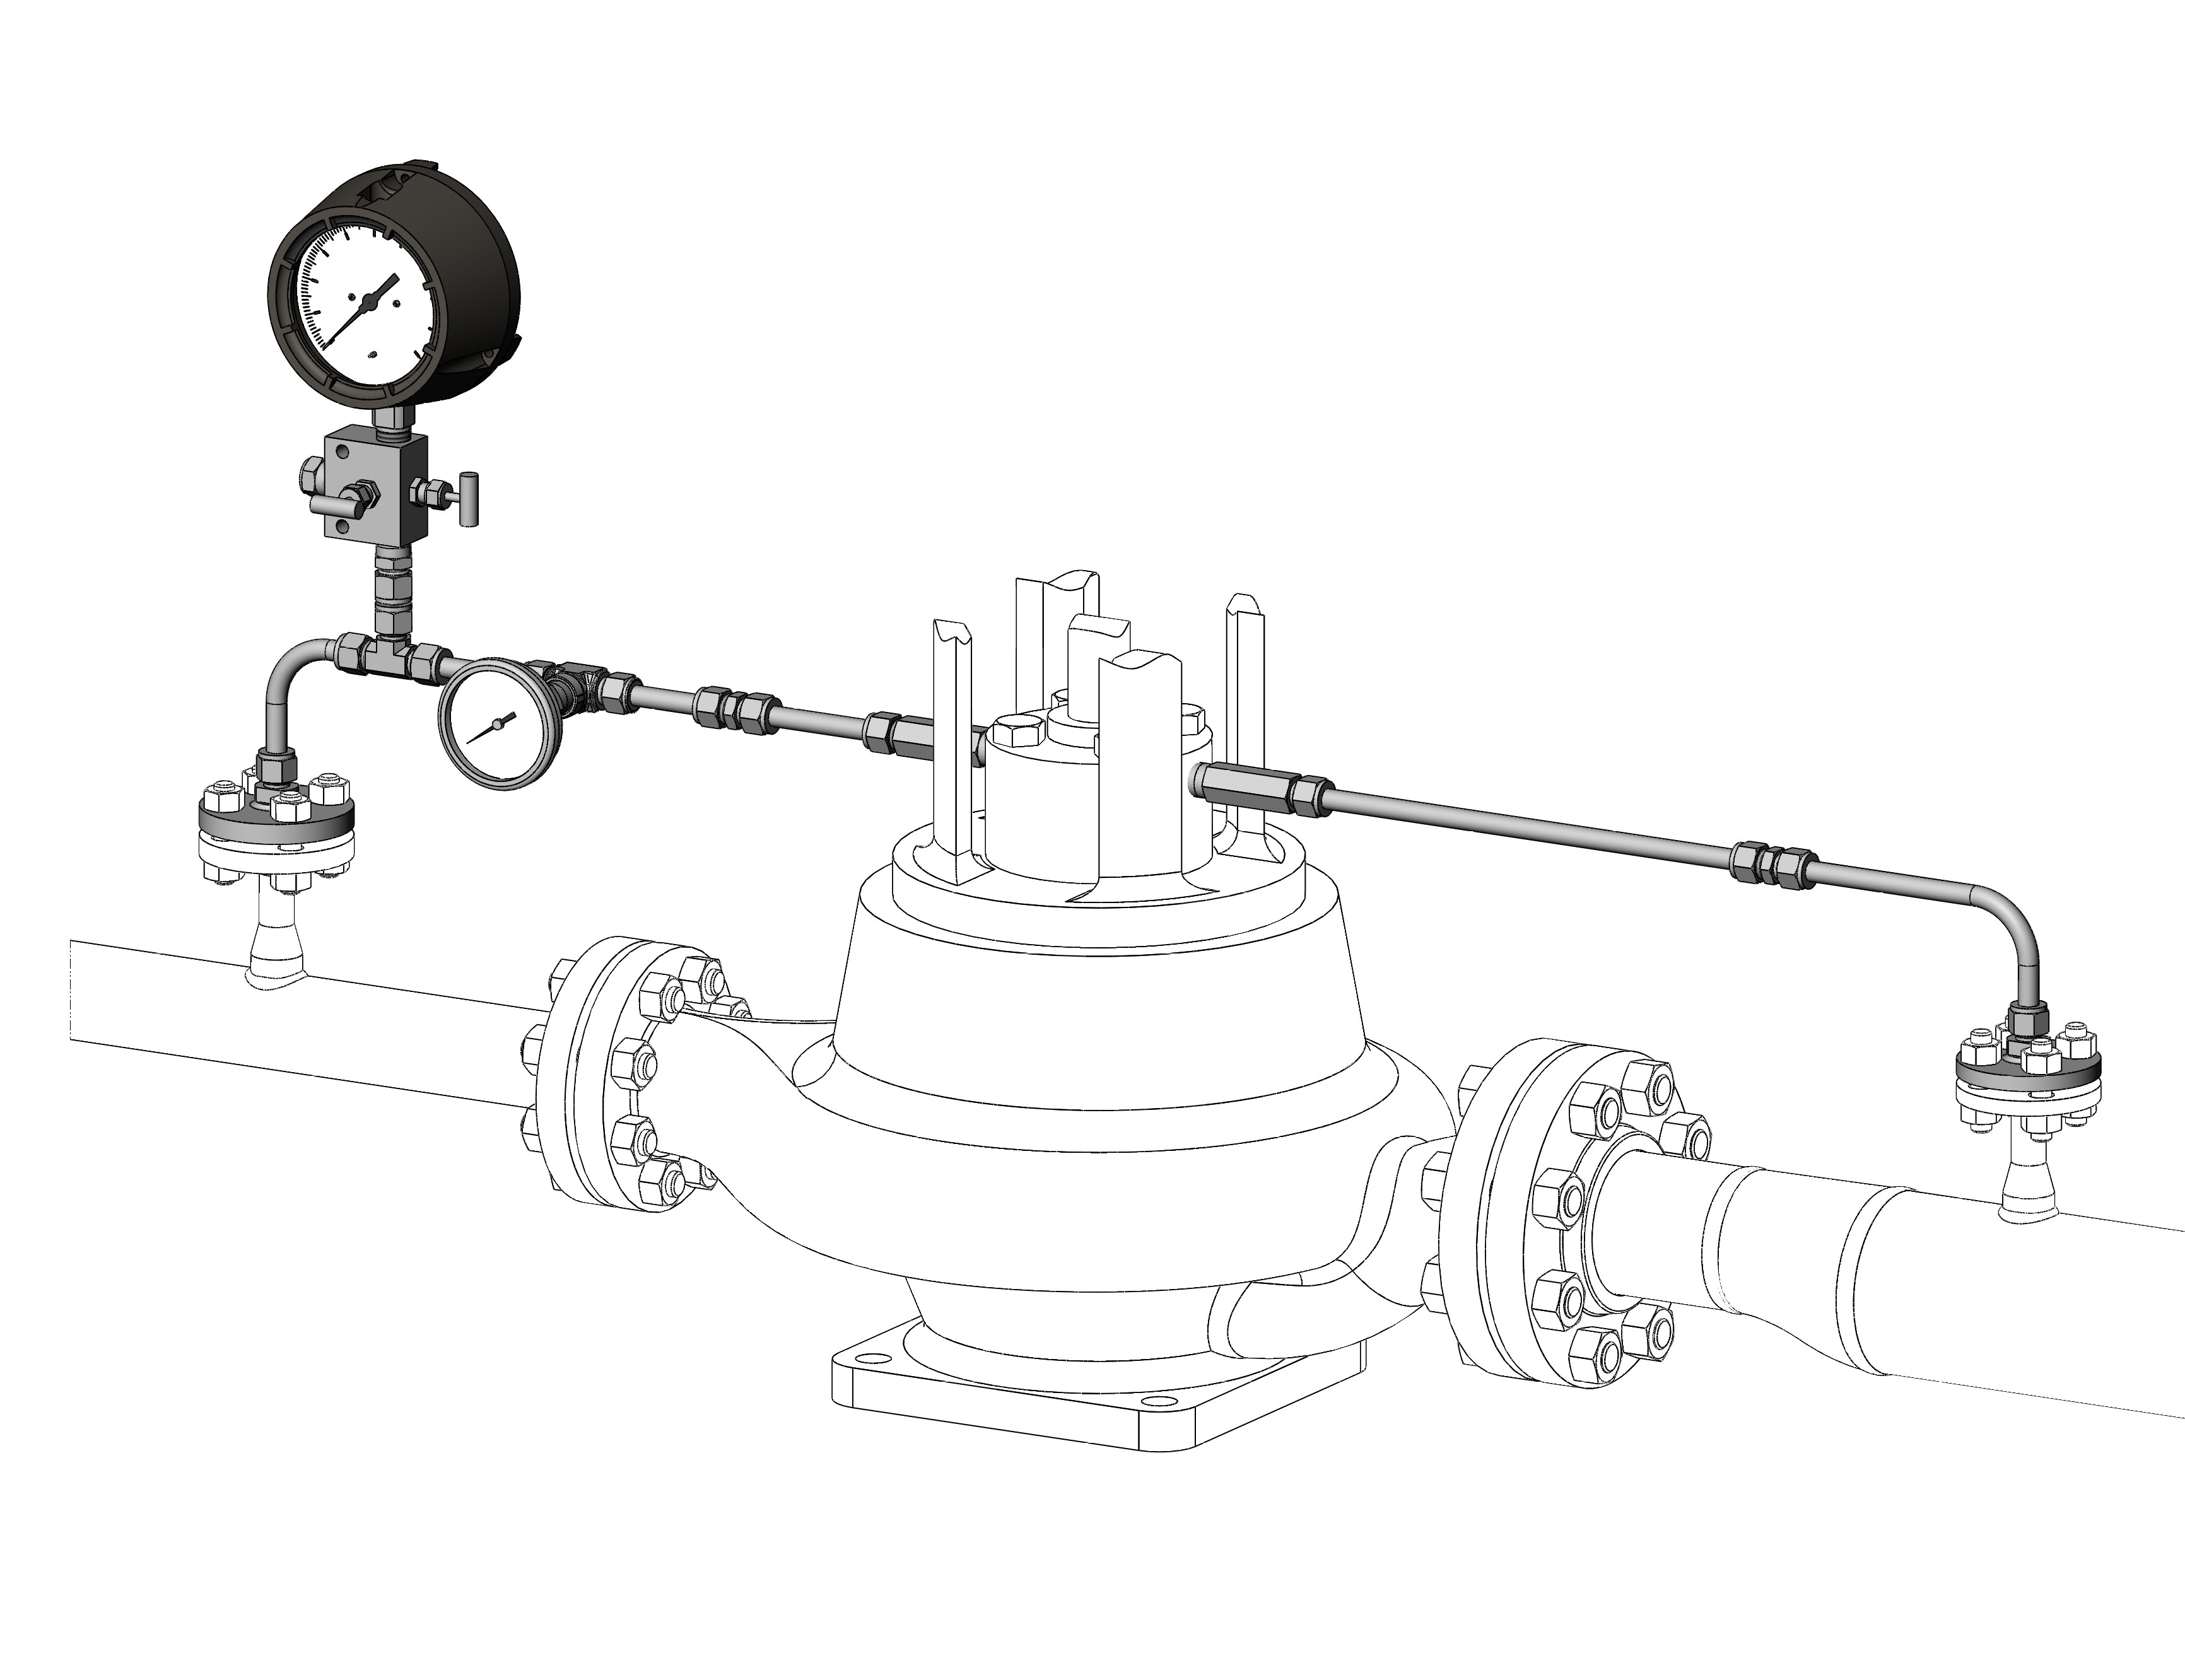 Rely on Swagelok Seal Support Systems to Reduce Pump Failures